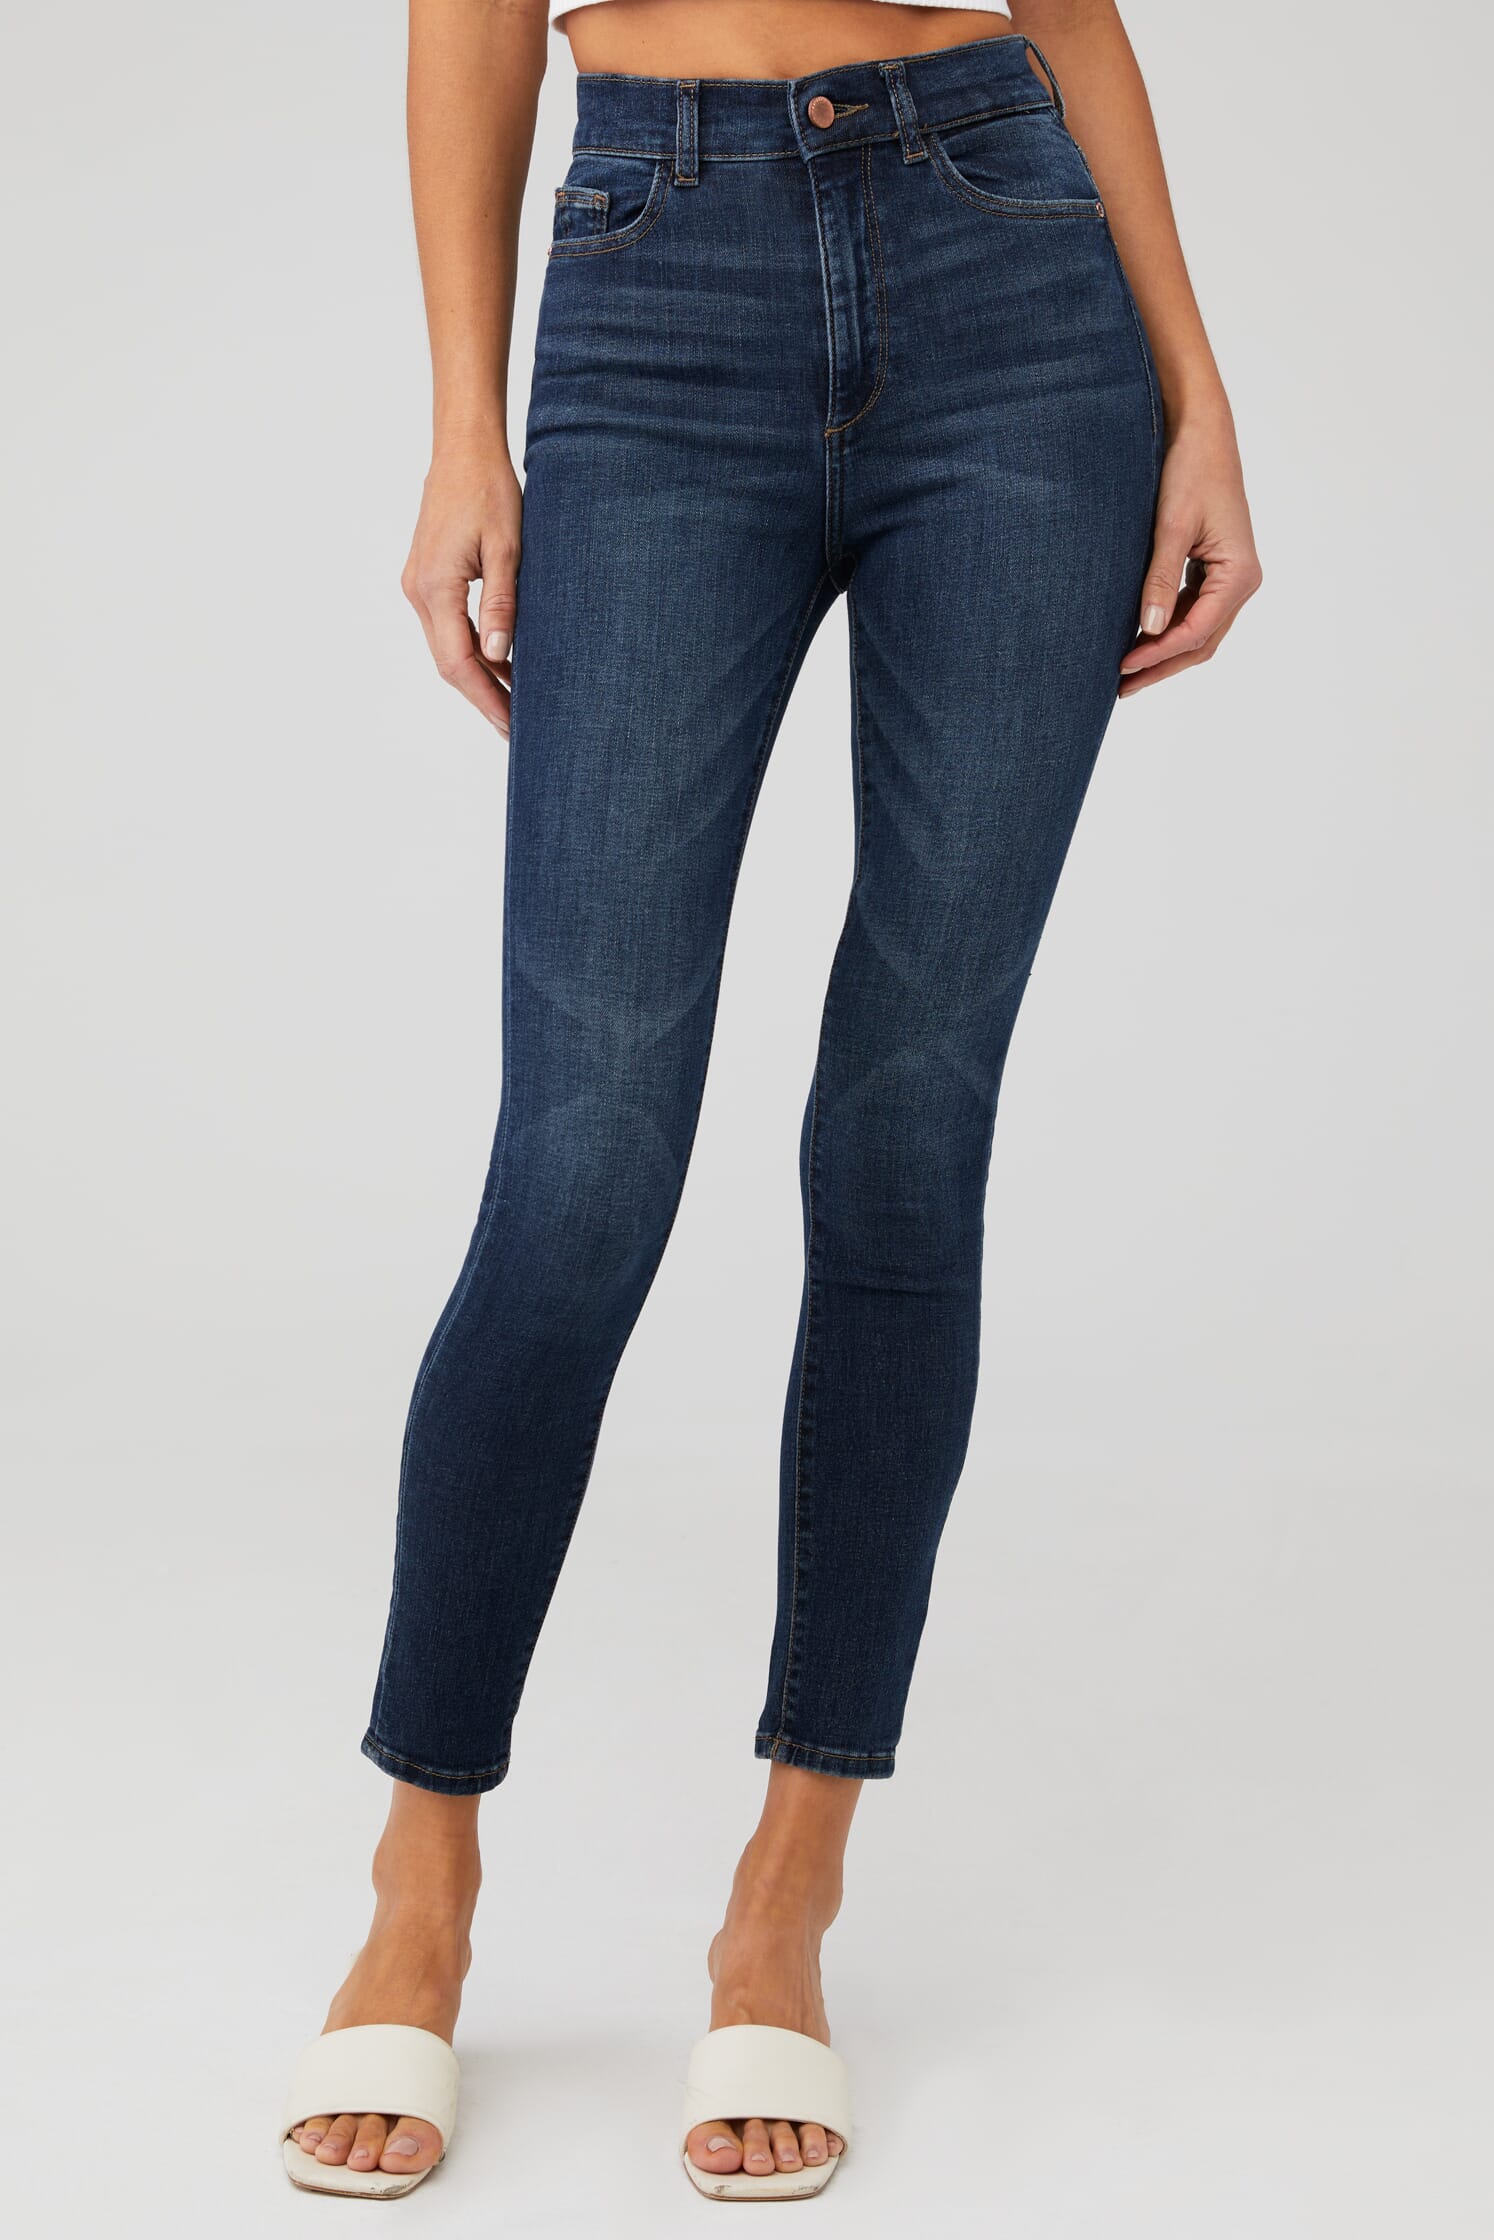 DL1961 | Farrow Ankle High Rise Skinny in Graham| FashionPass